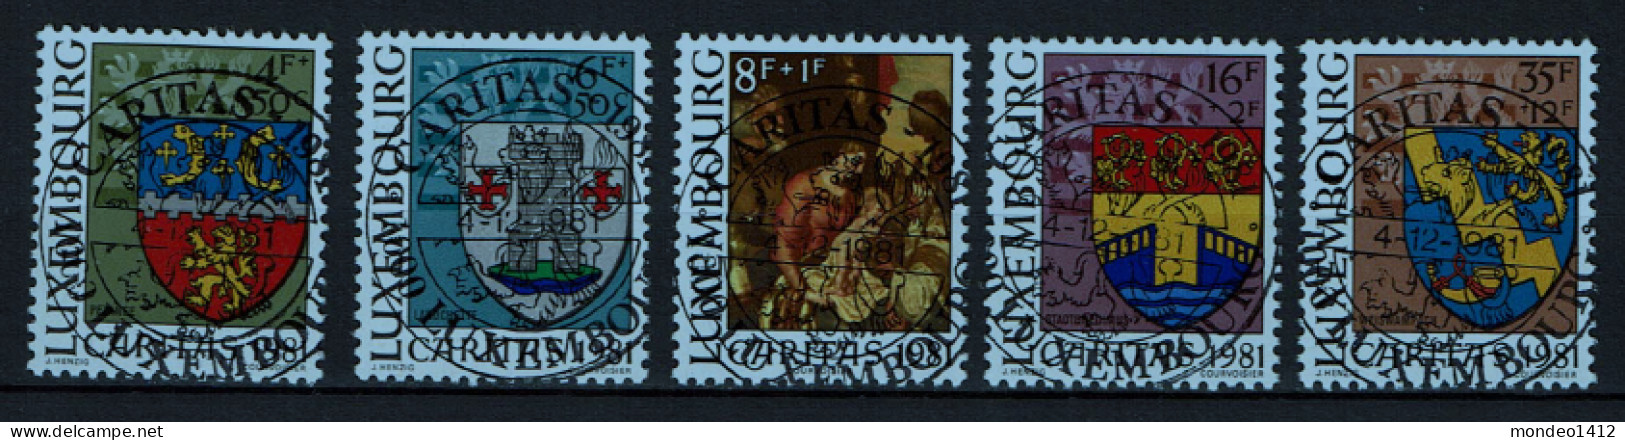 Luxembourg 1981 - YT 991/995 - Town Arms - Caritas Issue, Armoiries Communales, Wappenschilde, Tableau - Usados